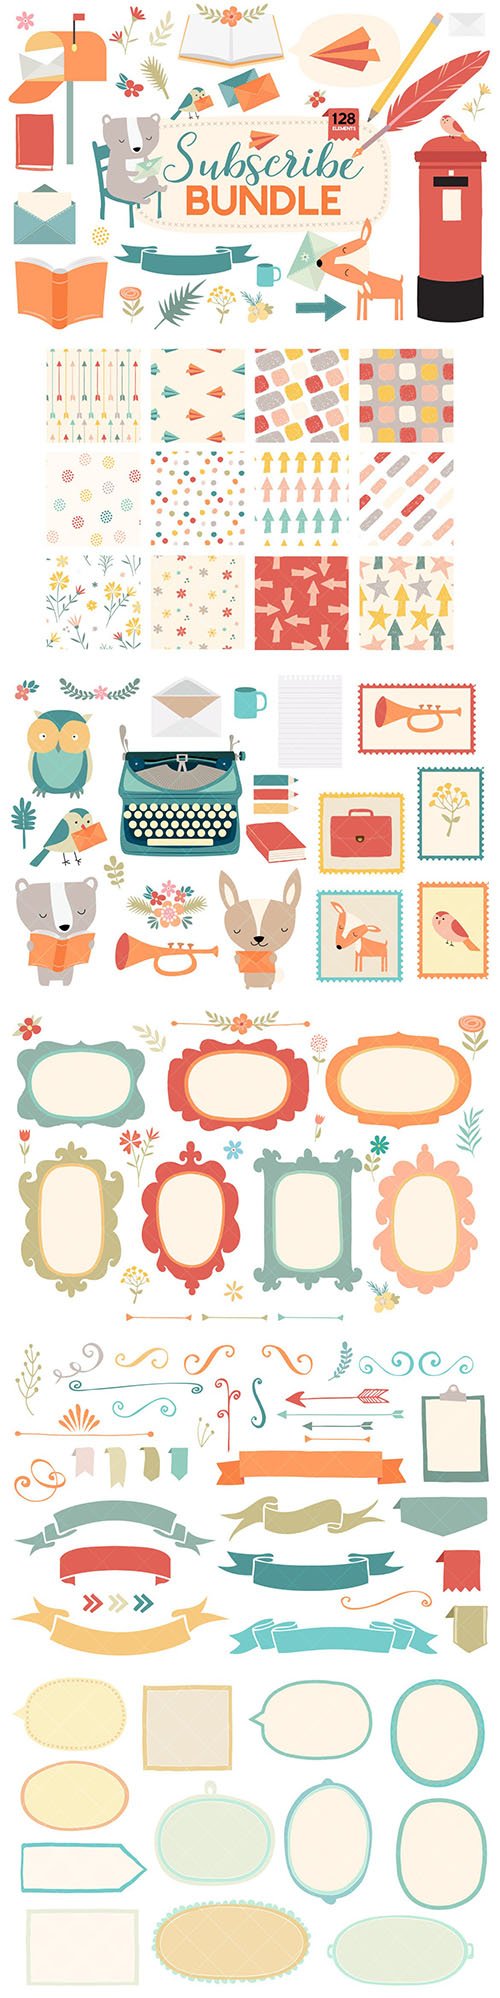 Email Newsletter and Mailing List Decorative Bundle